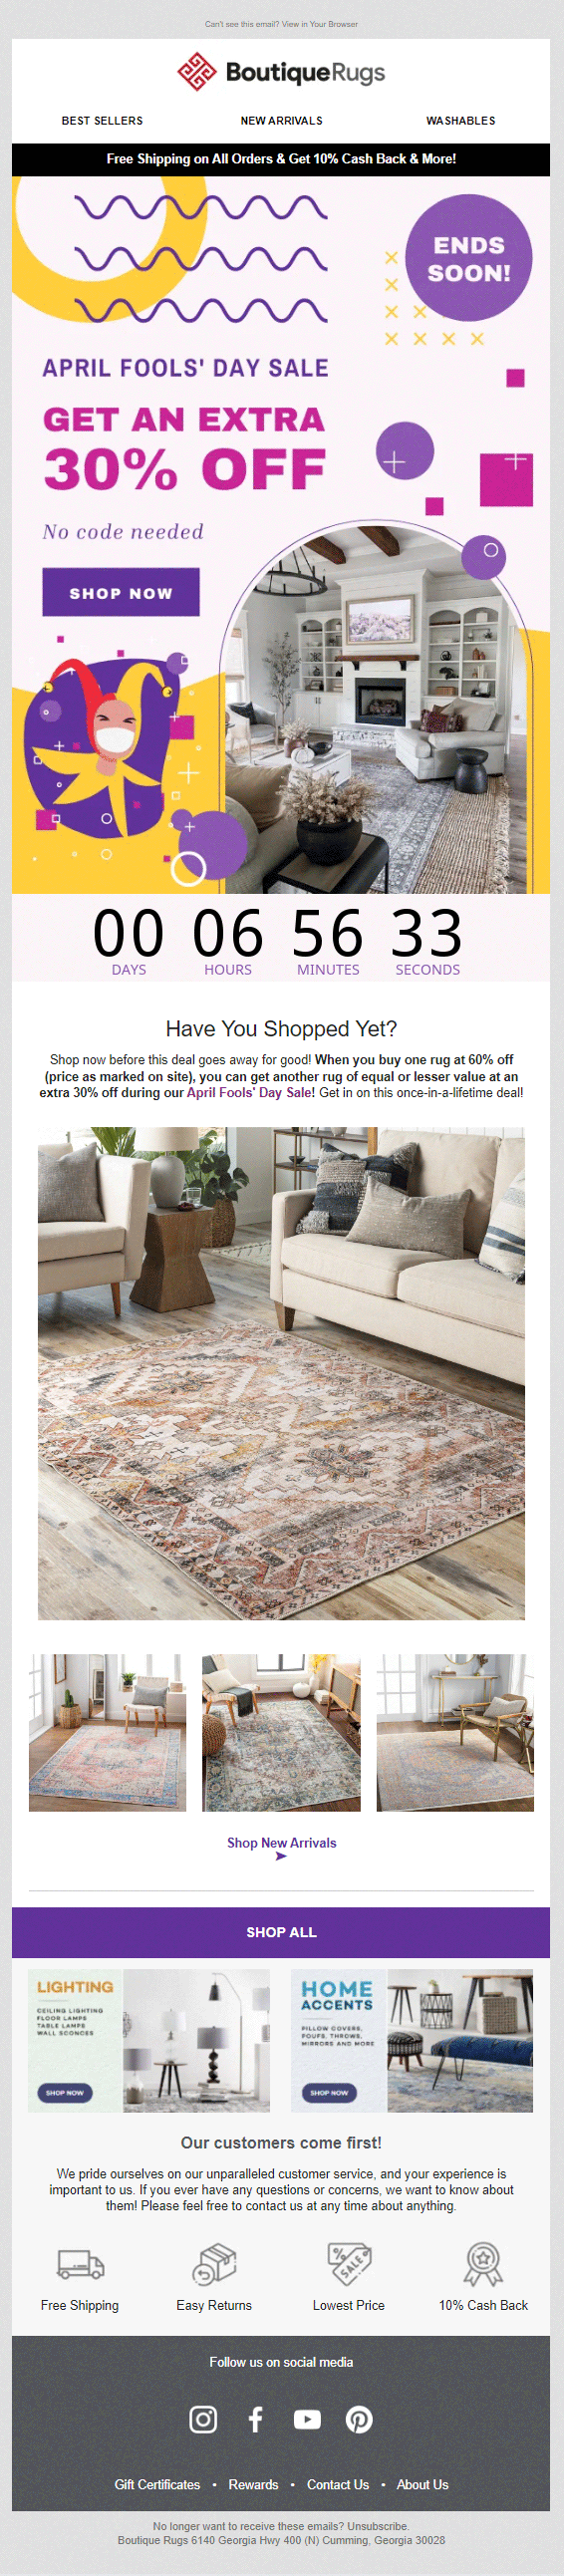 Boutique Rugs- April fools' email